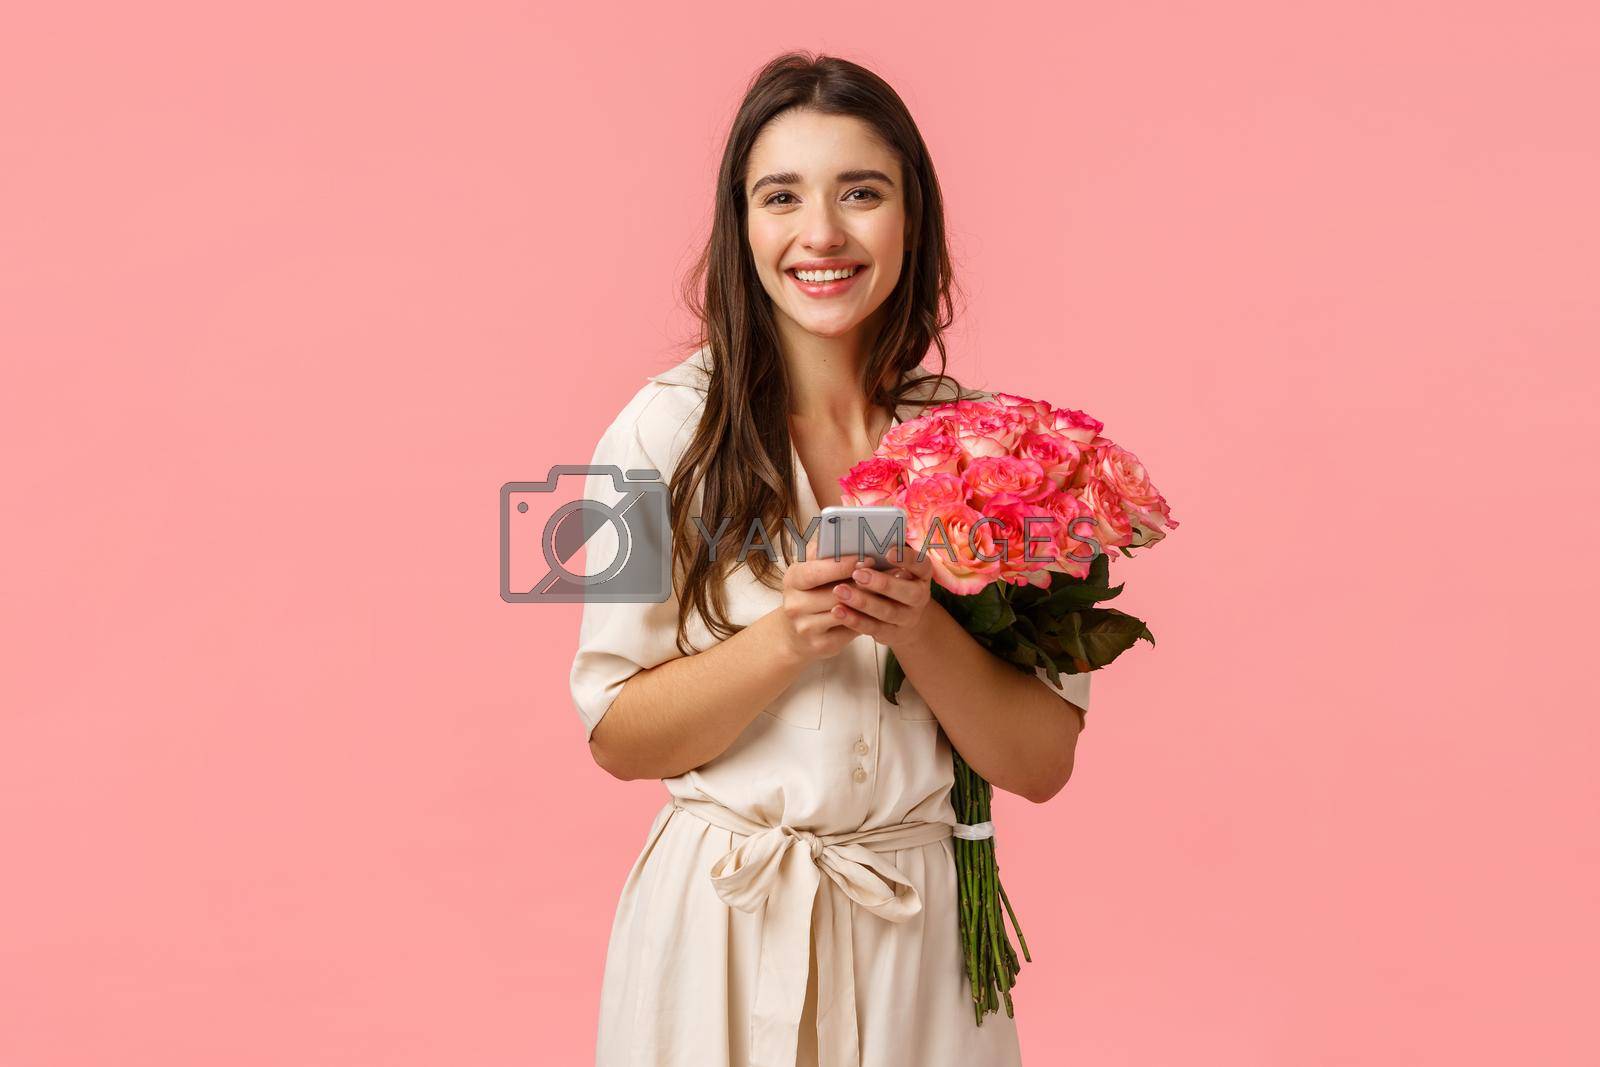 Technology, romance and happiness concept. Tender young cheerful smiling woman with beautiful flowers, holding smartphone, answer on congratulations b-day, chatting on birthday, pink background.